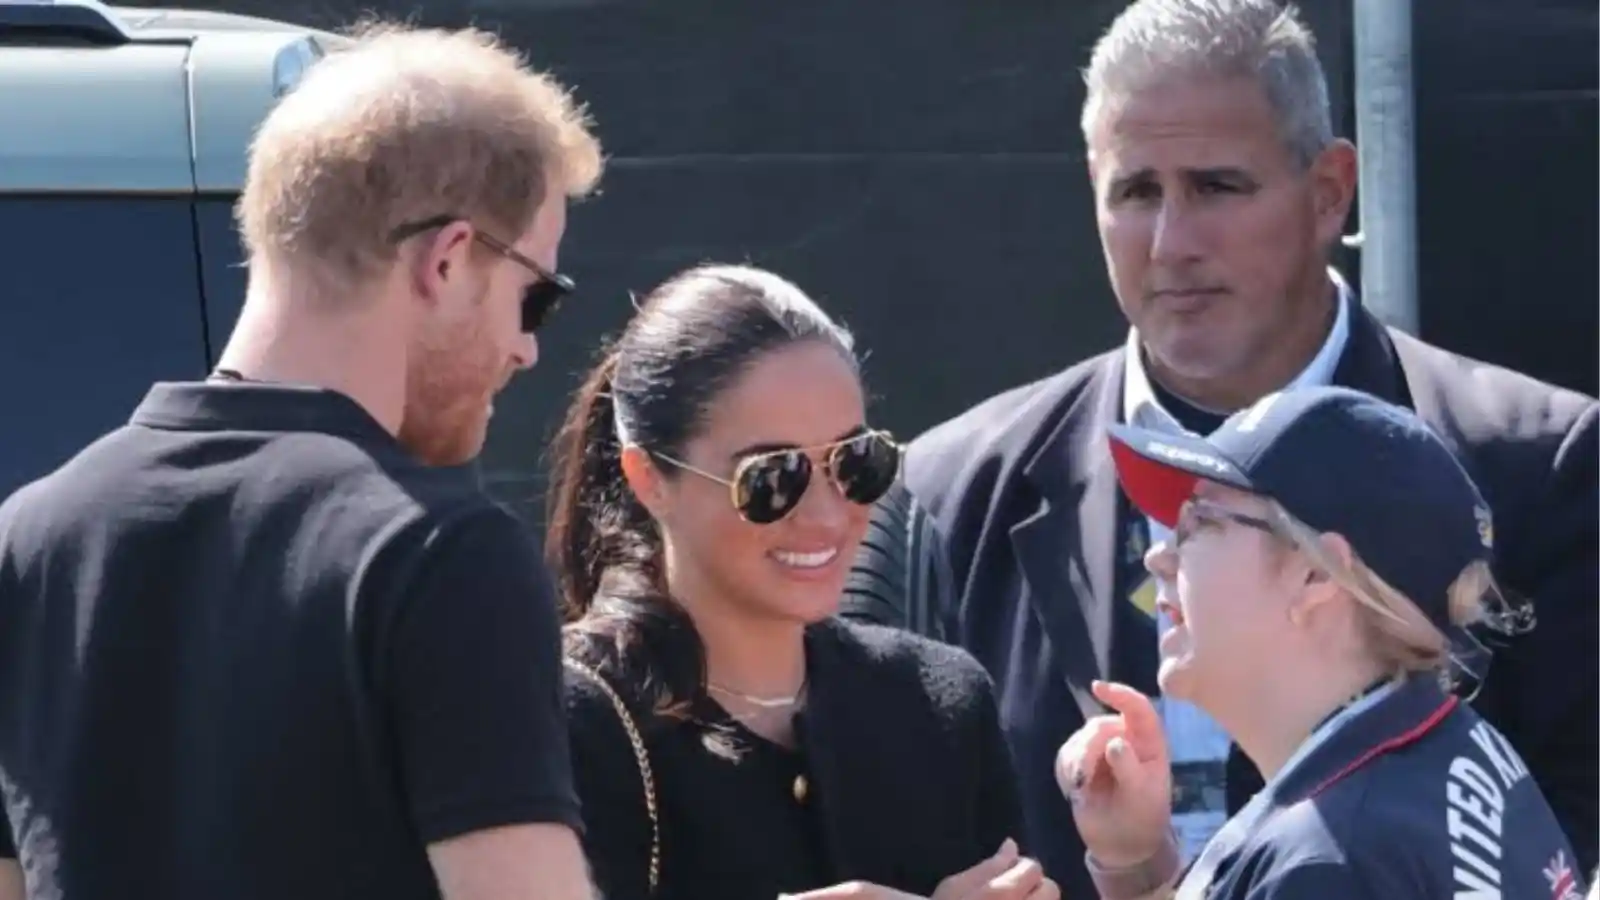 Who is Prince Harry and Meghan Markle's new bodyguard?